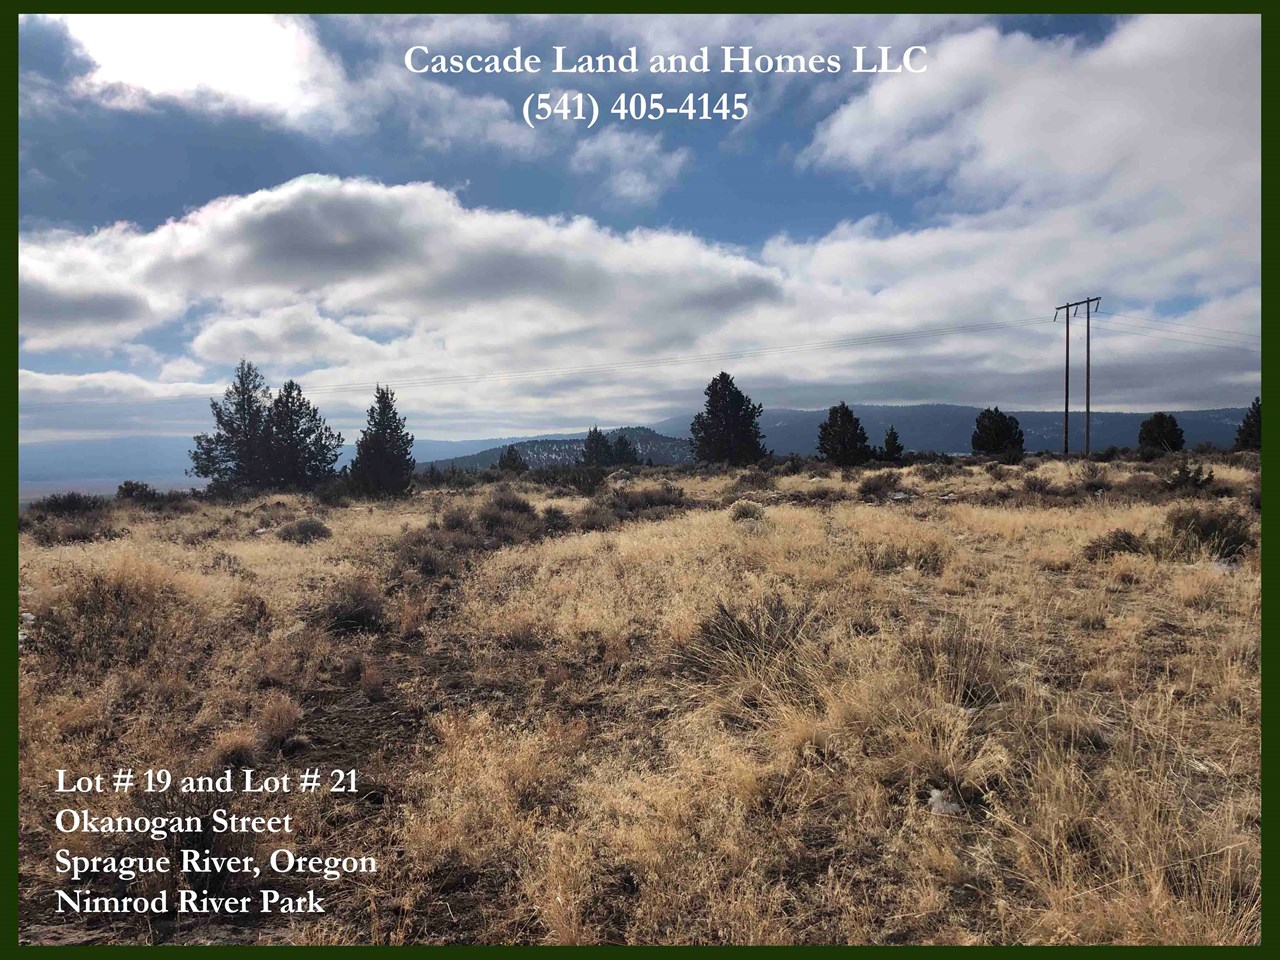 this large property sits high on a volcanic plateau, and most of the land is flat offering gorgeous views across the sprague river valley and the surrounding mountains and foothills. the valley is comprised mostly small farms and ranches.  as this property sits on the edge of the volcanic rim, your incredible views would remain unobstructed. the area is rural, but not remote. there is the small community of sprague river just down the road, and the city of klamath falls is only about 45 minutes away. the adjoining property is also for sale from the same owner!